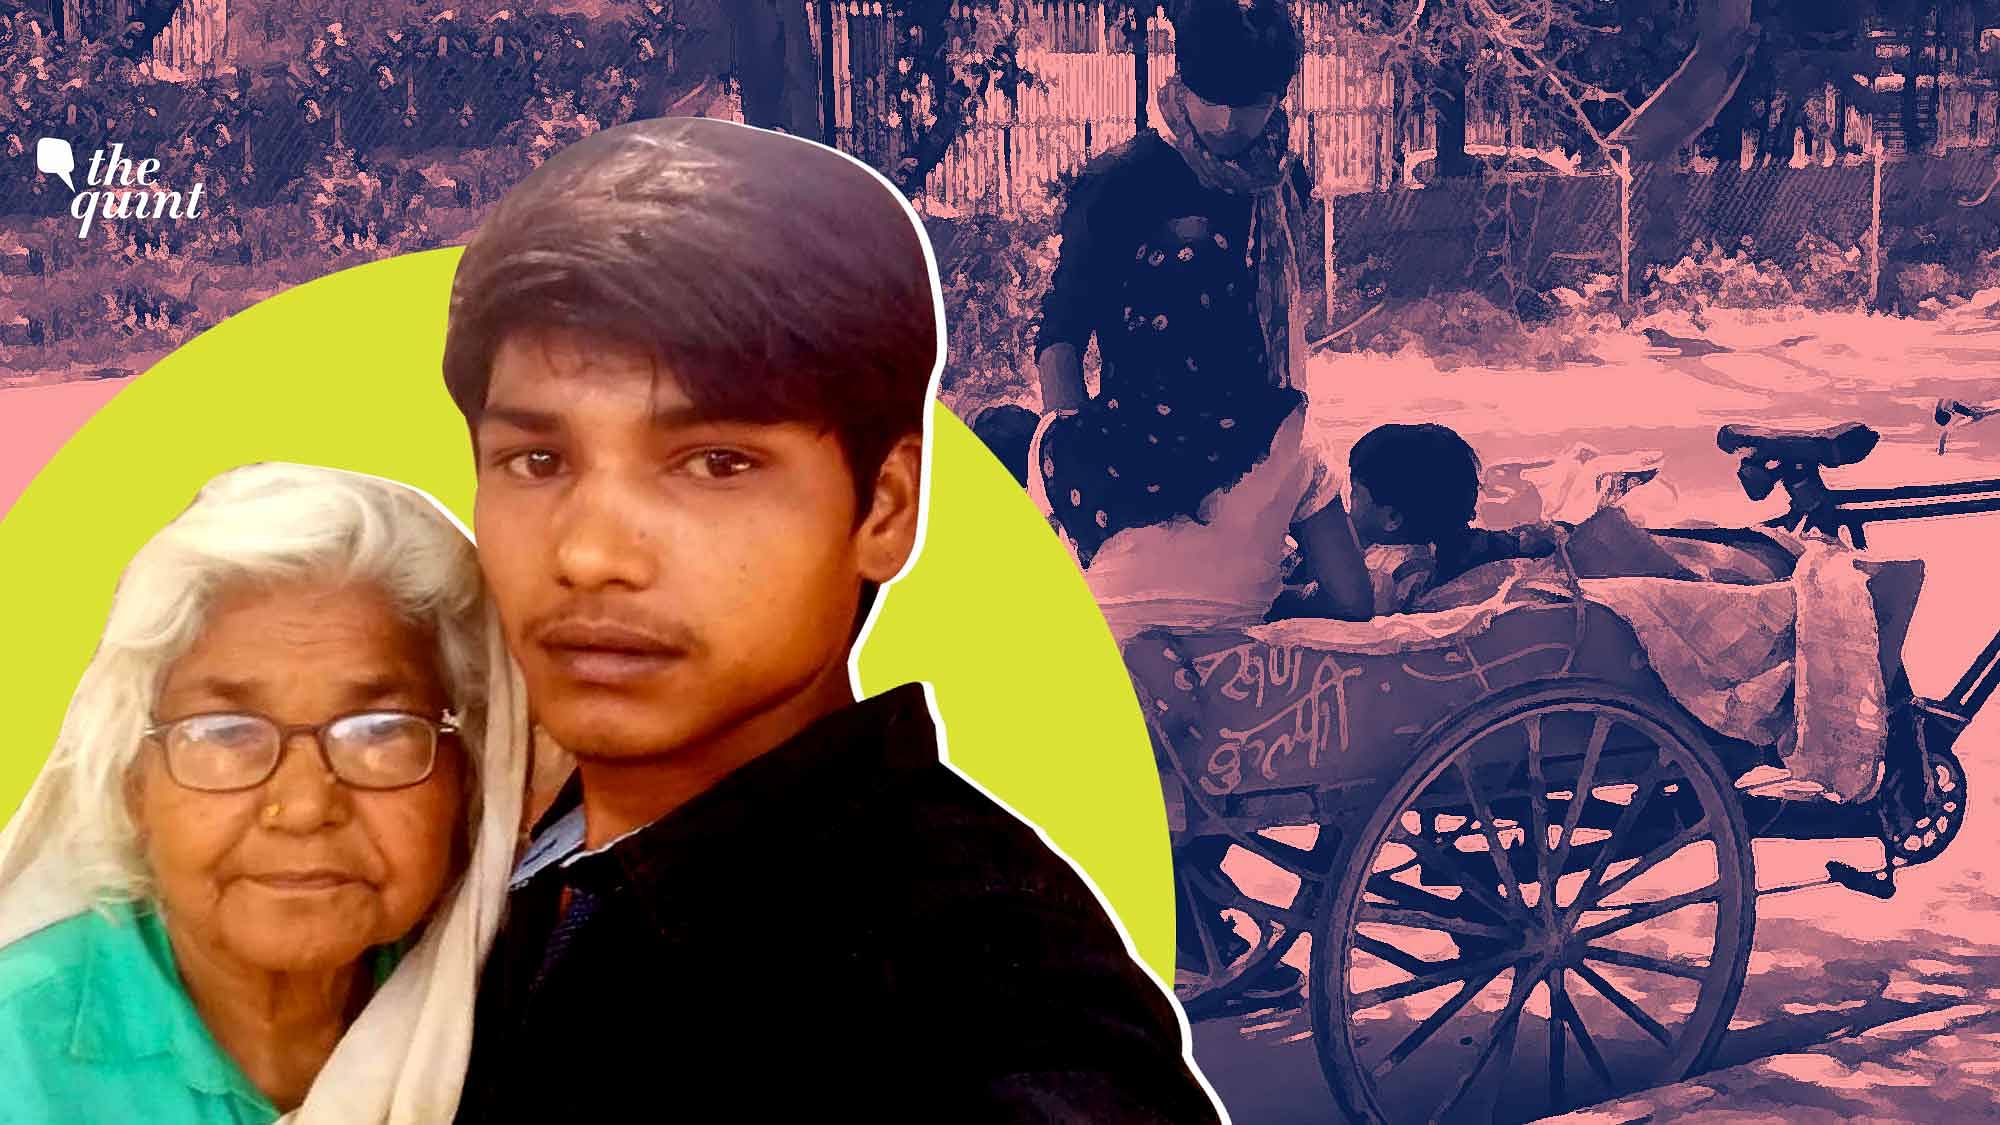 Financial help pours in for Satvir, a migrant worker, after The Quint published is plight of loosing his only source of livelihood, his kulfi cart.&nbsp;